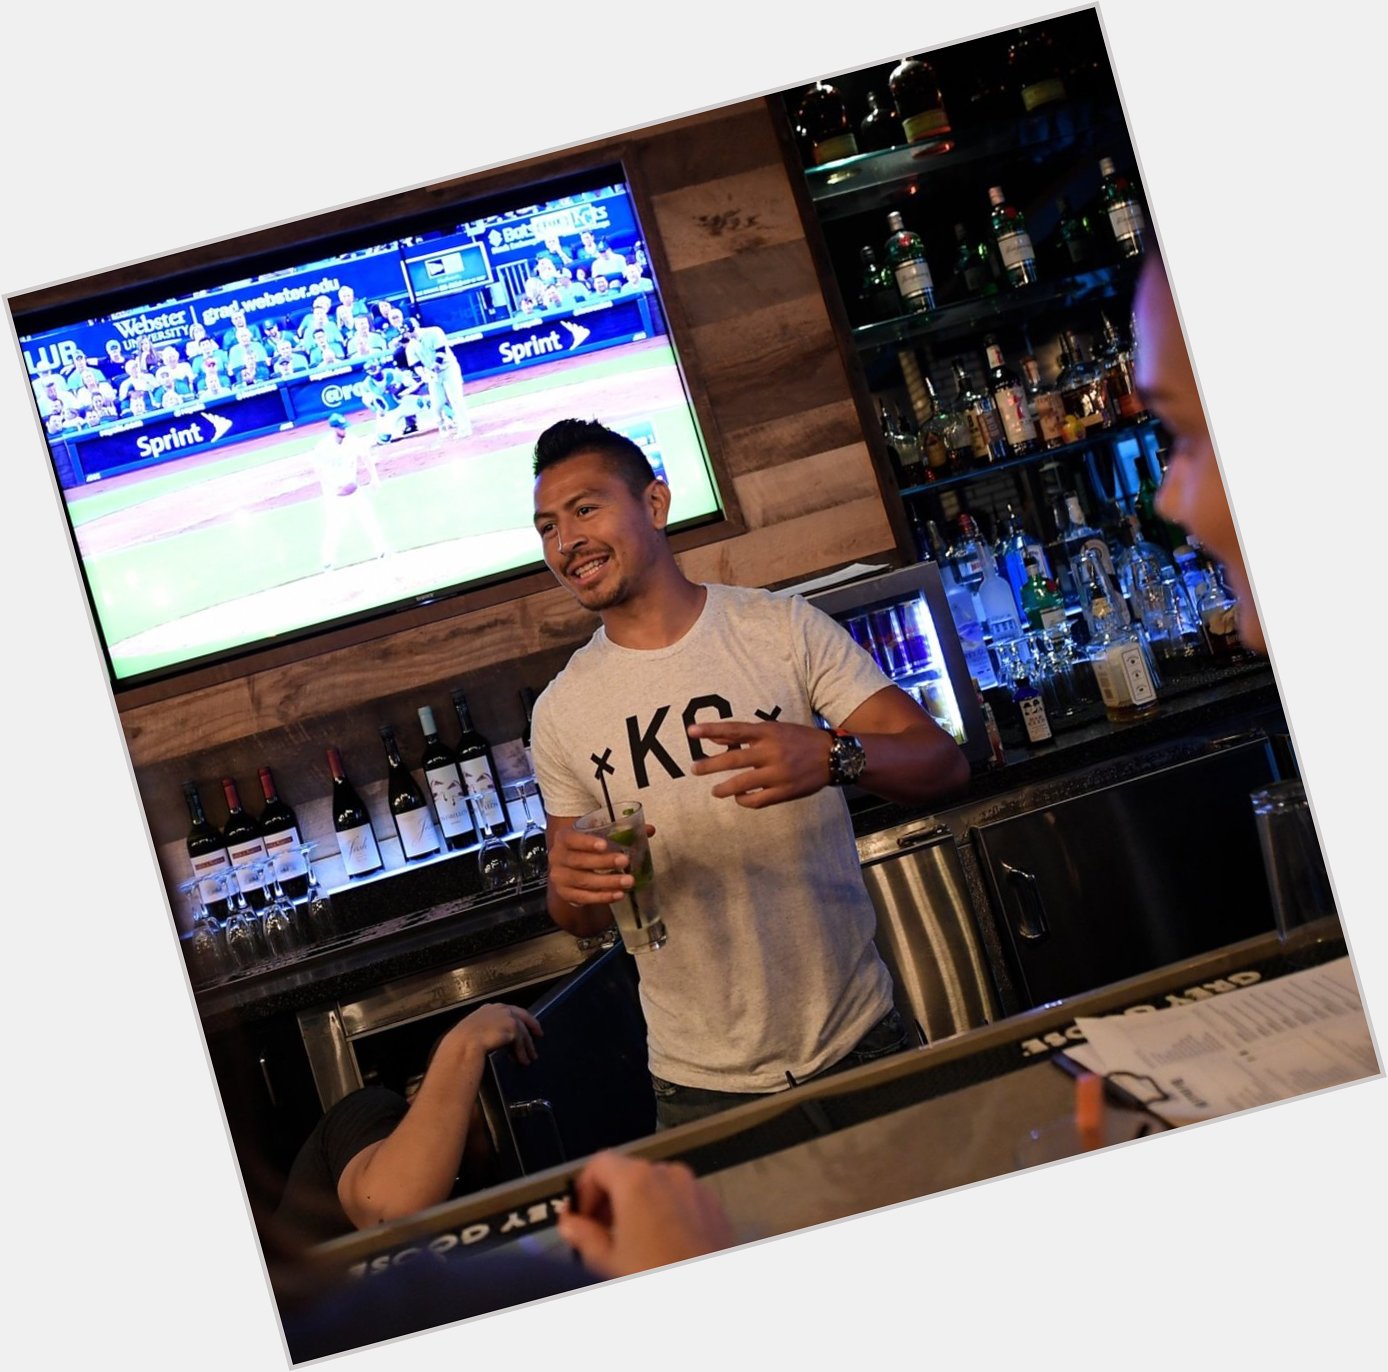  to when the birthday boy Roger Espinoza graced us with his mad bartending skills.

Happy birthday, Rog! 